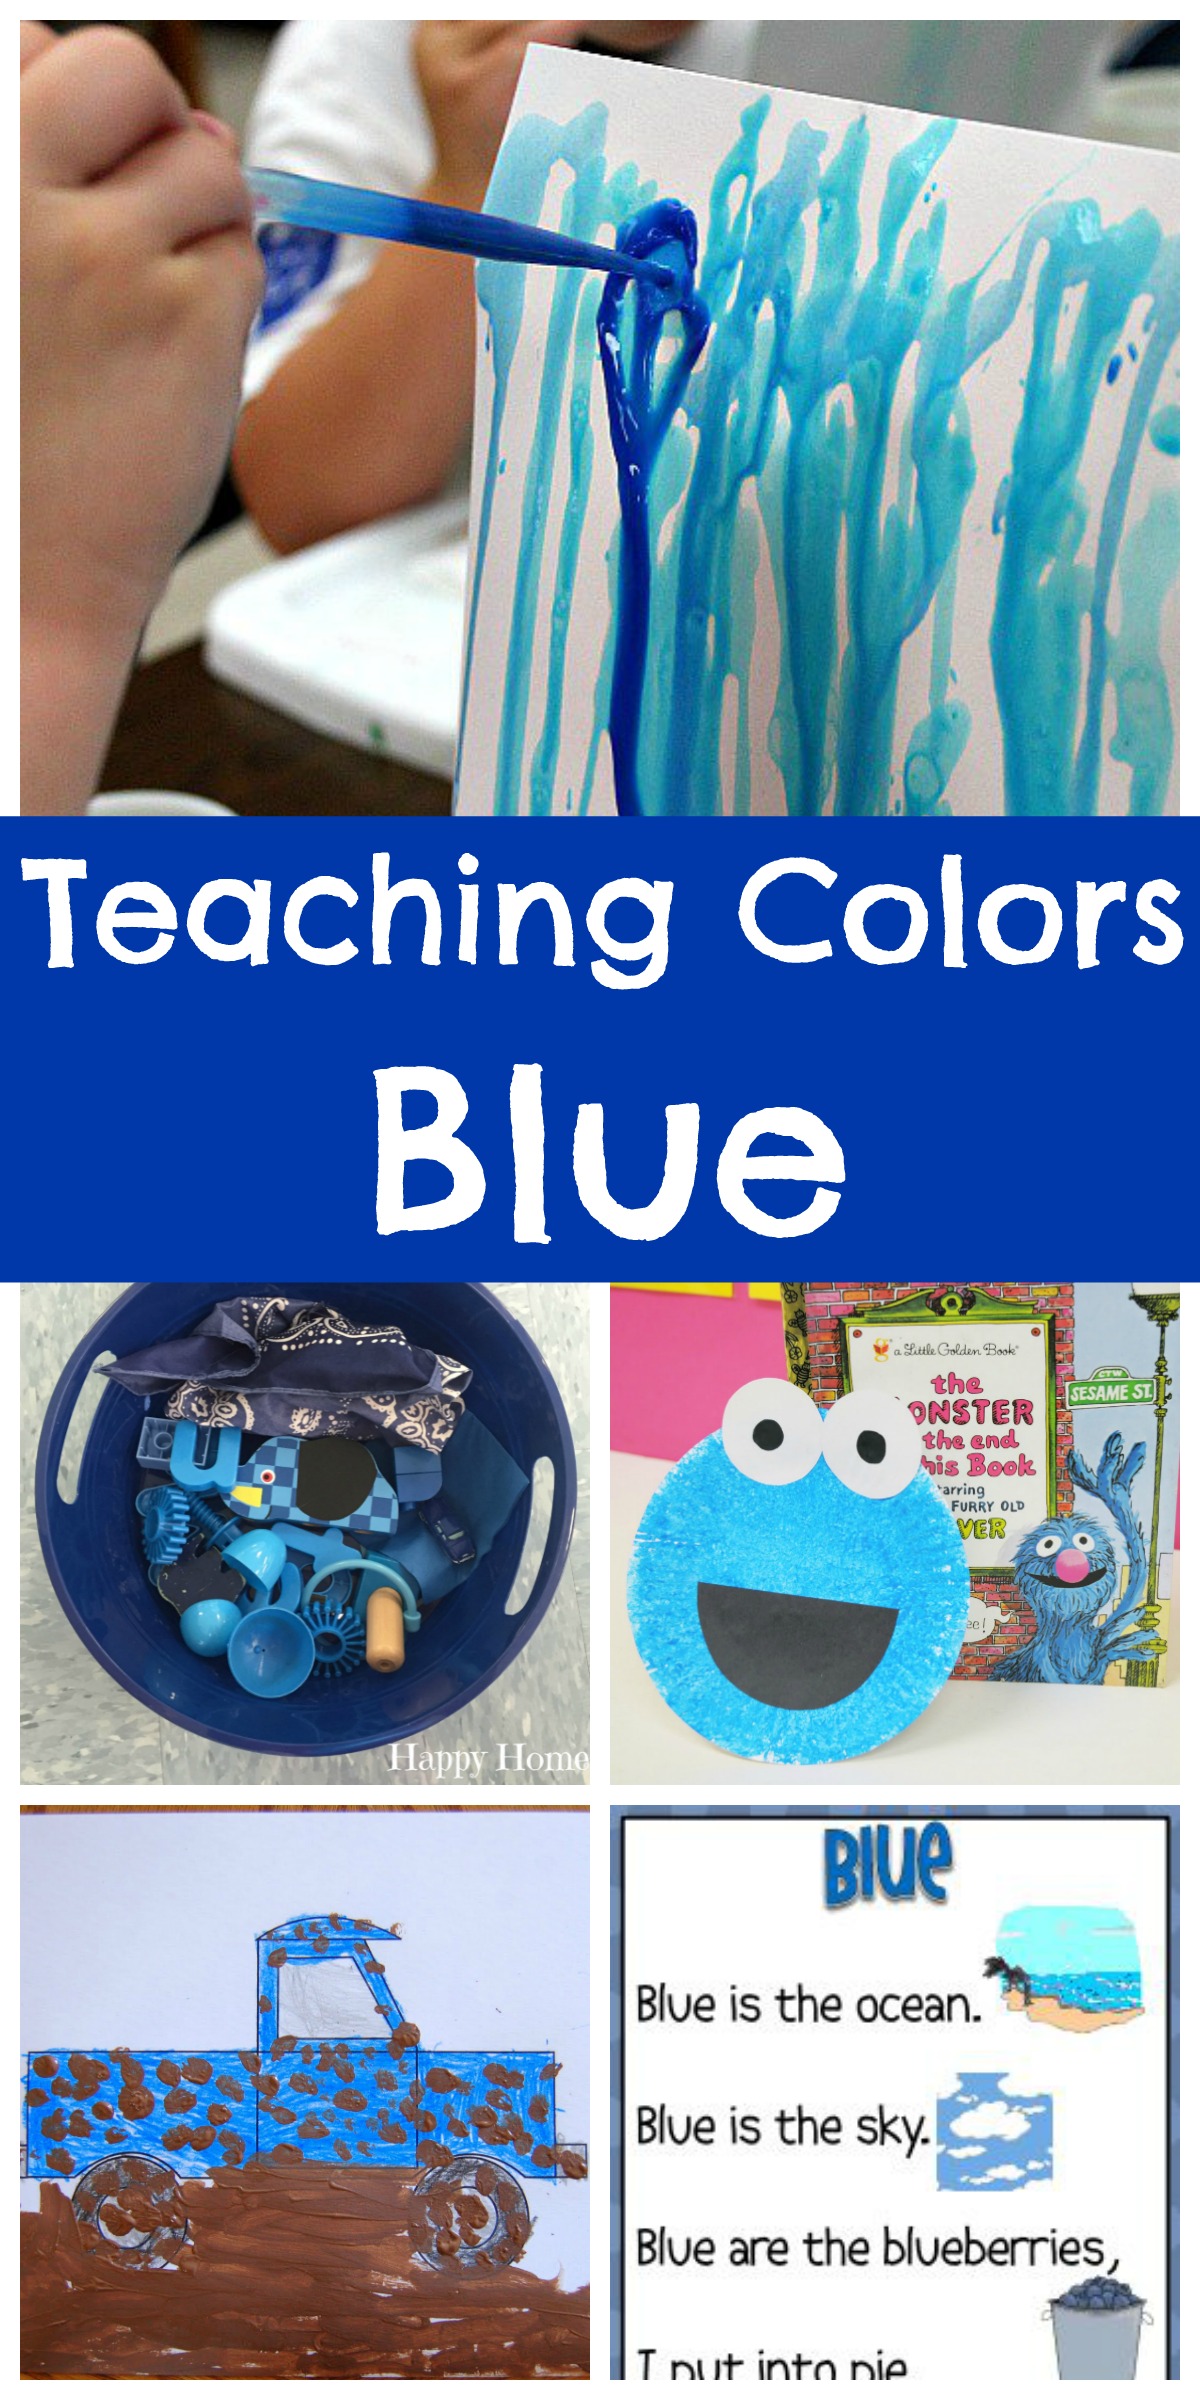 so-many-fun-colorful-activities-inspried-by-color-wonder-hooray-for